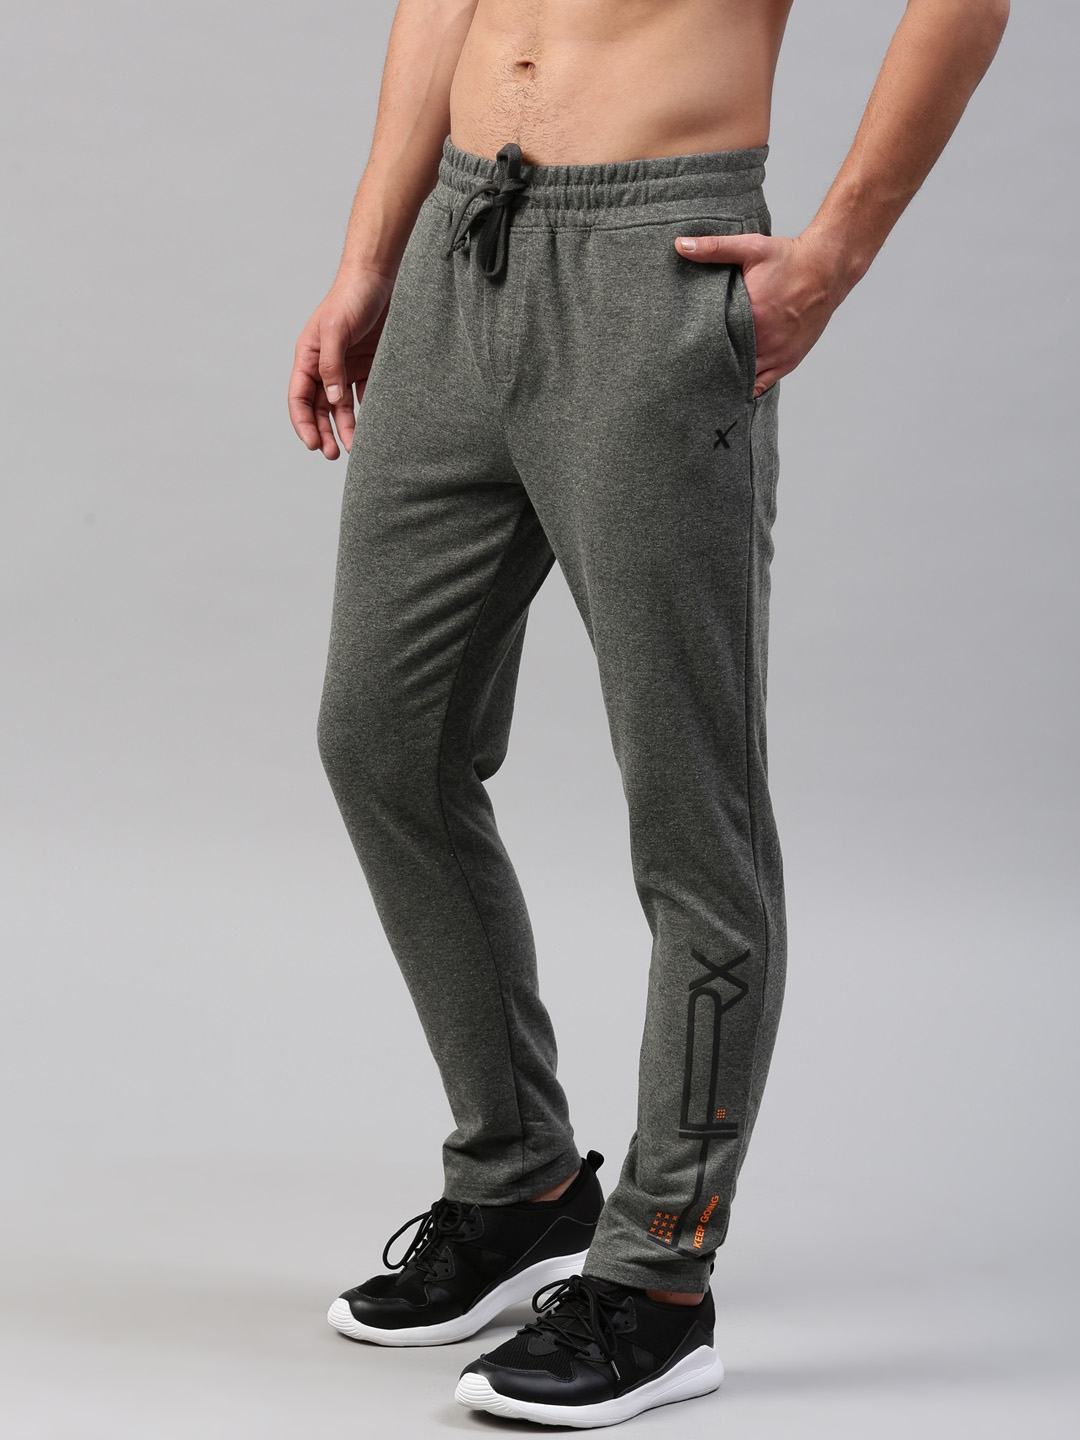 Hrx By Hrithik Roshan Grey Solid Athleisure Track Pants for men price   Best buy price in India August 2023 detail  trends  PriceHunt